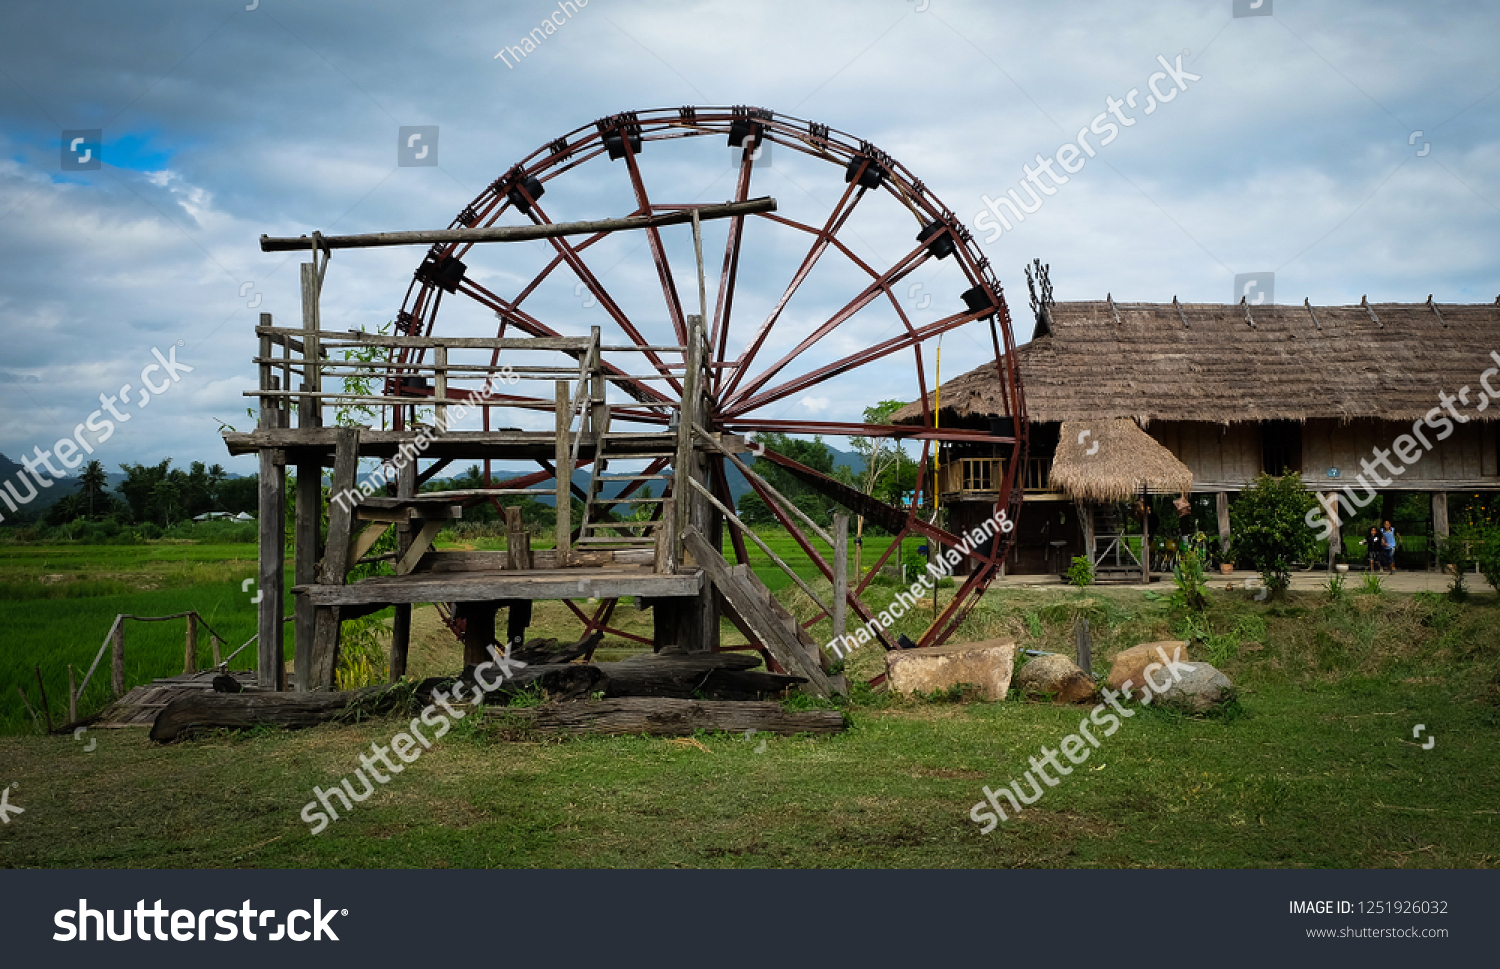 Ancient baler or water turbine in Ban Na Pa Nat, Tai Dam Ethnic Cultural Village, Loei Province, Thailand. #1251926032